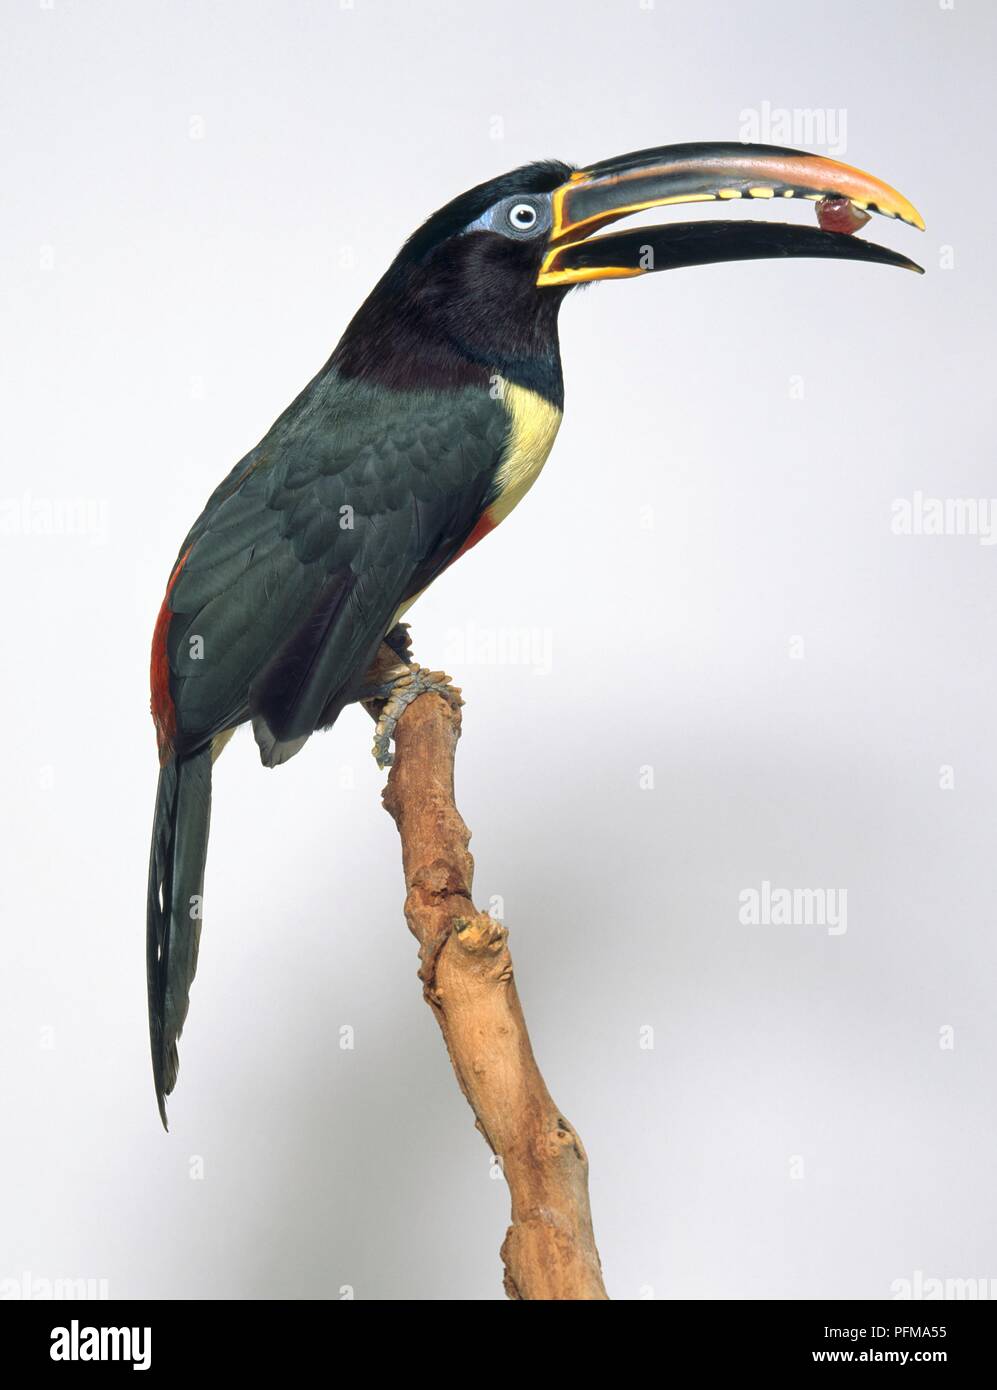 Chestnut-eared aracari (Pteroglossus castanotis) perching on a branch with seed in its beak, side view Stock Photo